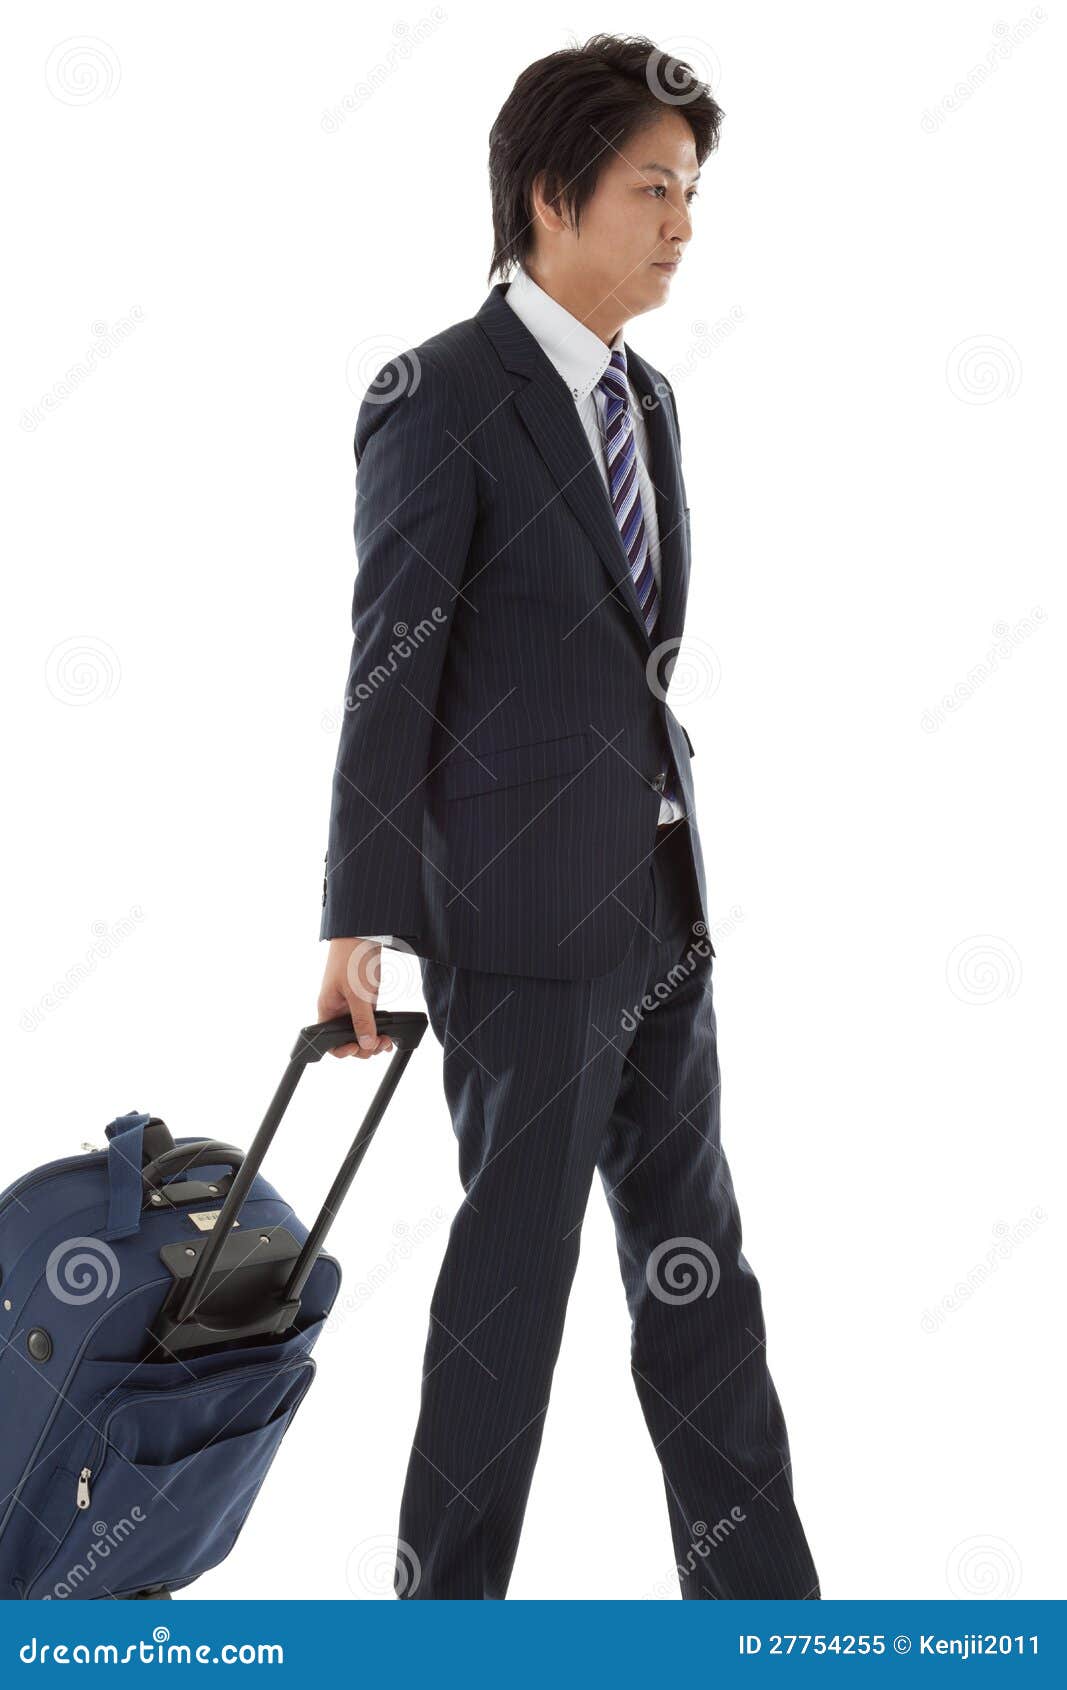 he is on business trip